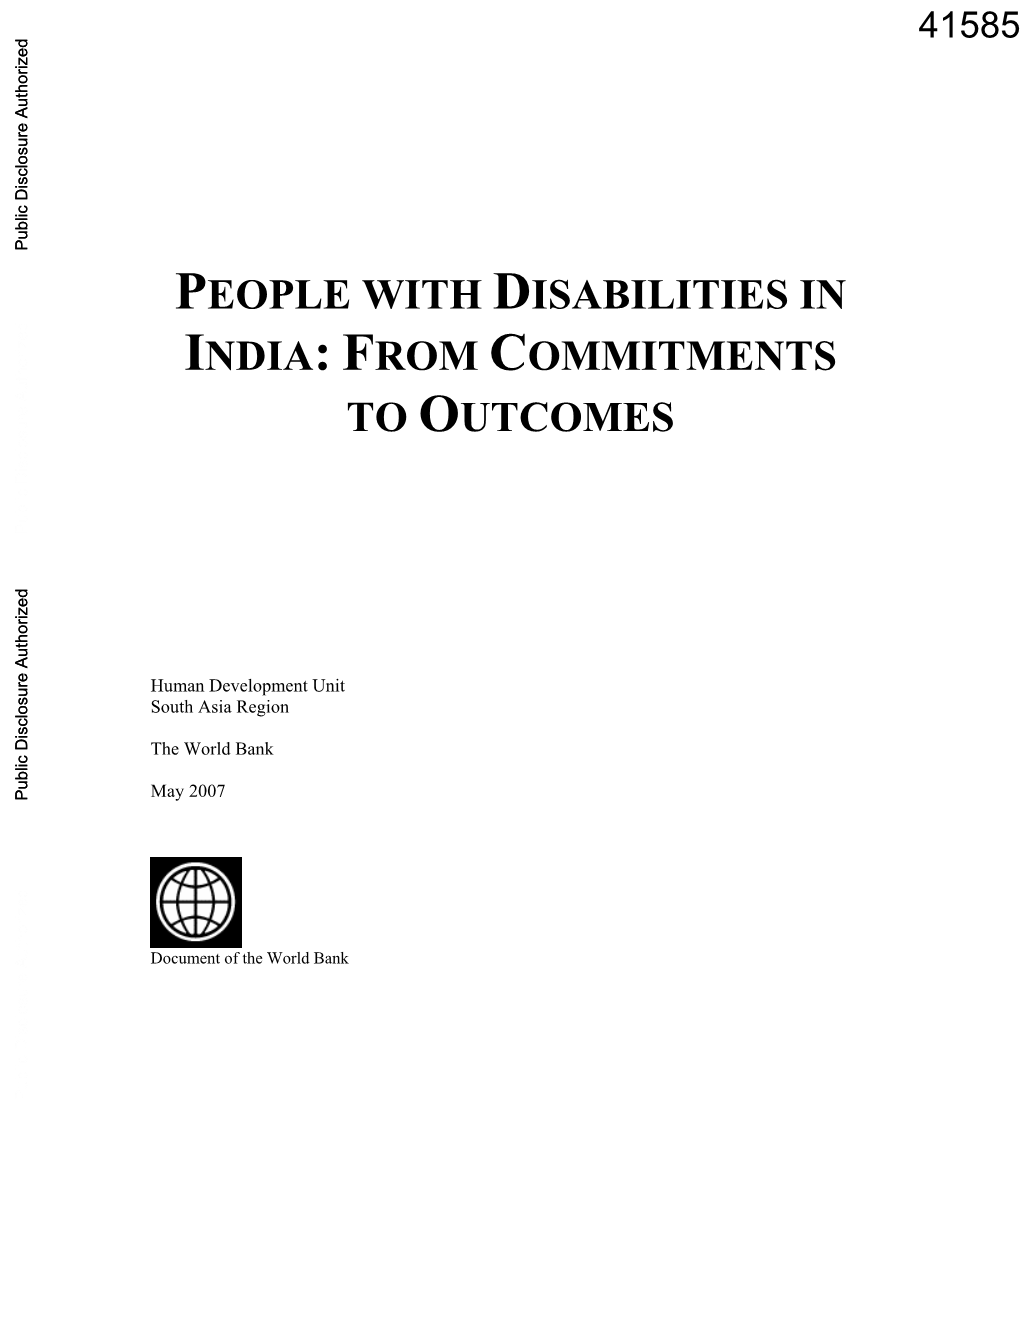 C Disclosure Authorized PEOPLE with DISABILITIES in INDIA: from COMMITMENTS to OUTCOMES